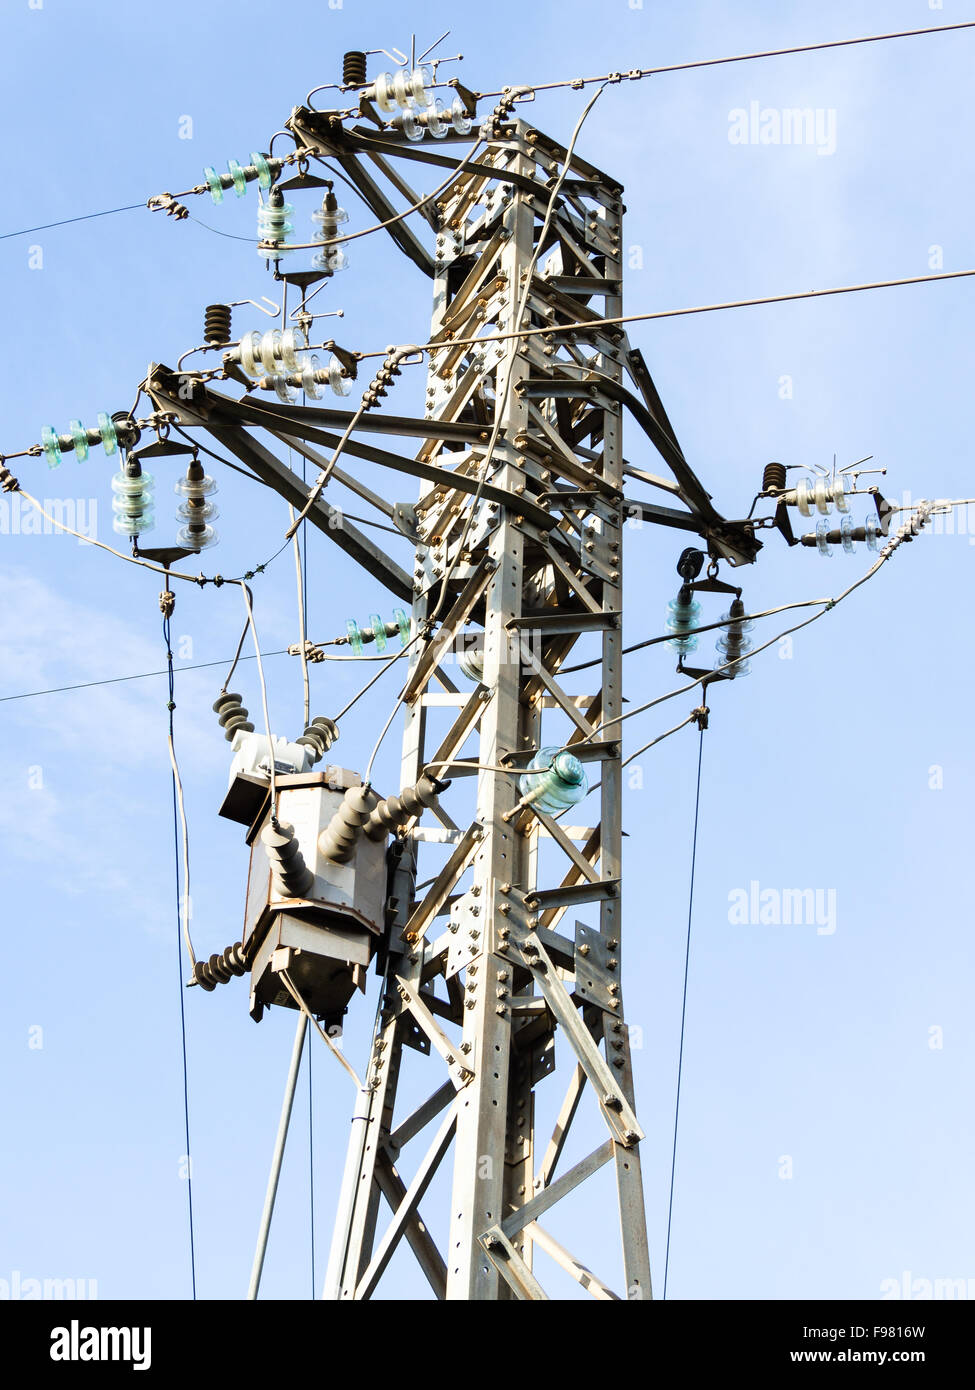 Particular a Pylon. particularly of the components of high voltage pylon. Stock Photo